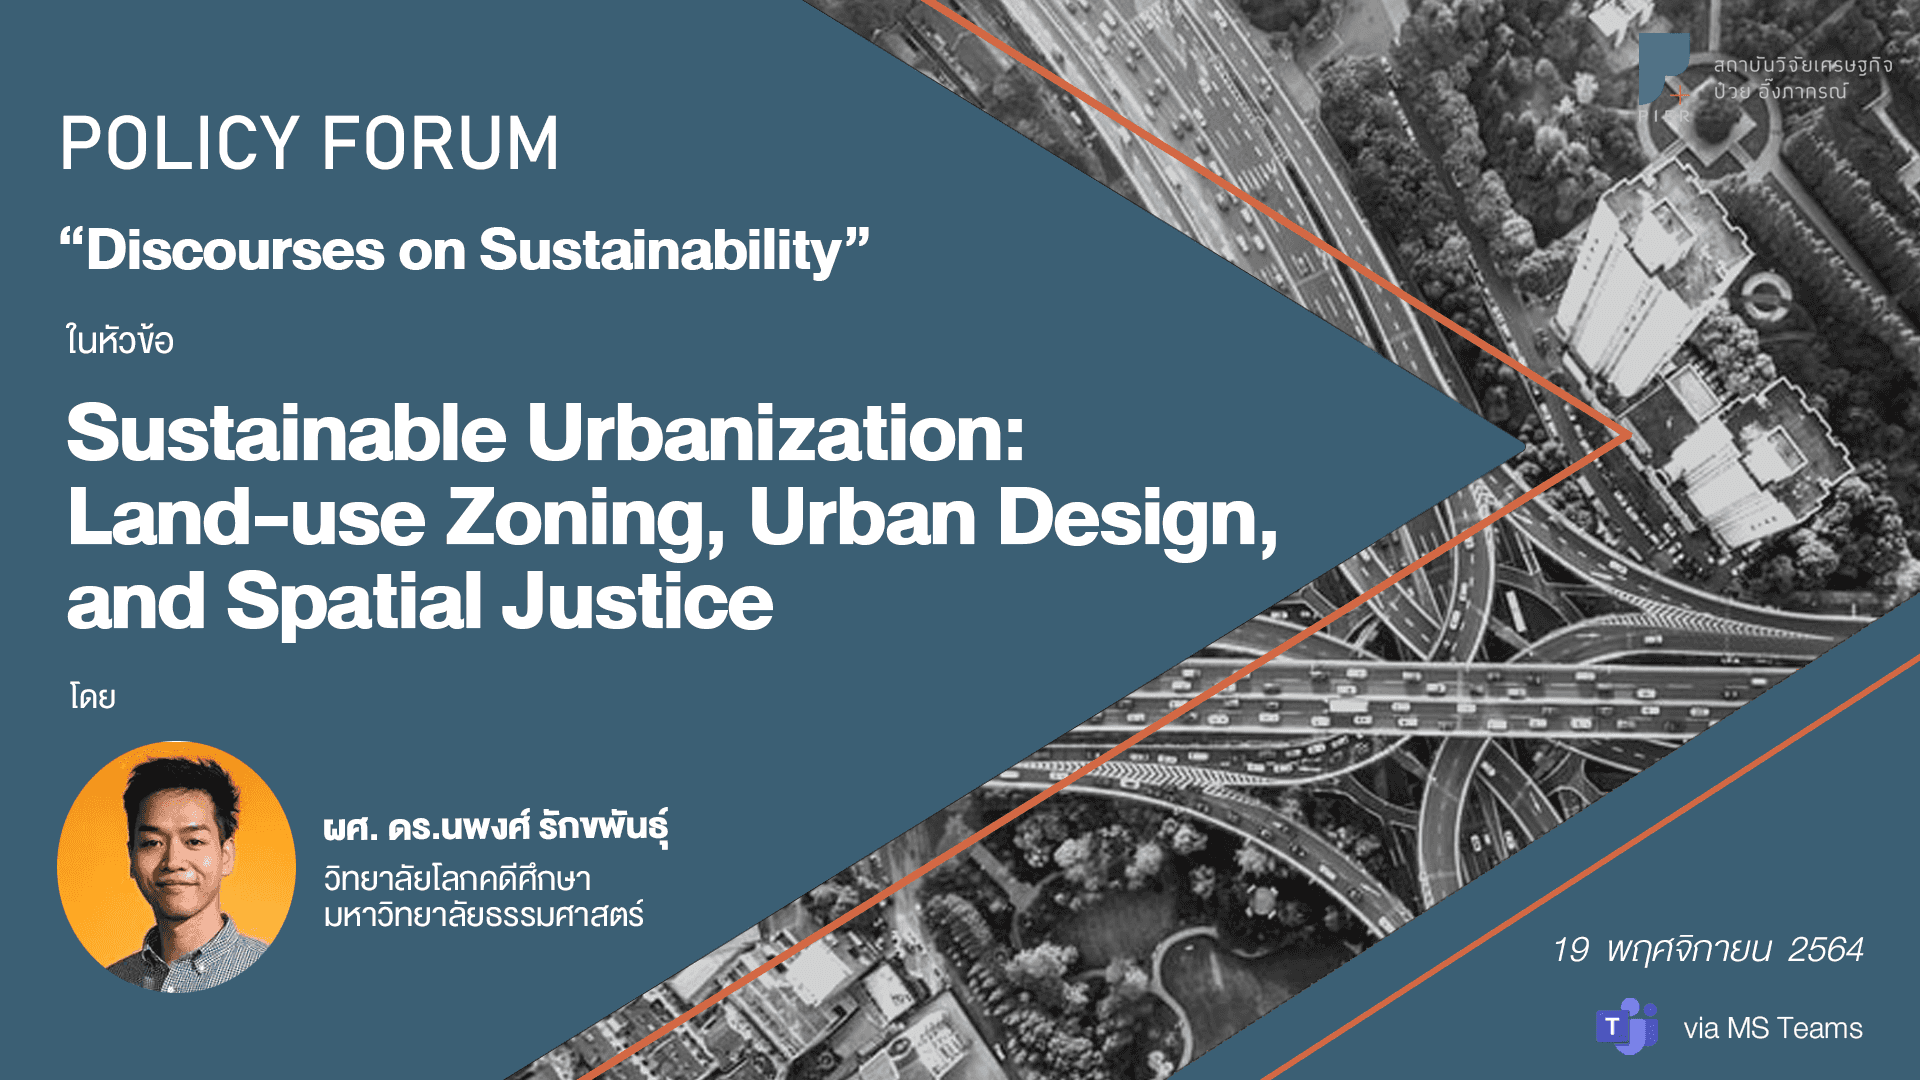 Sustainable Urbanization: Land-use Zoning, Urban Design, and Spatial Justice